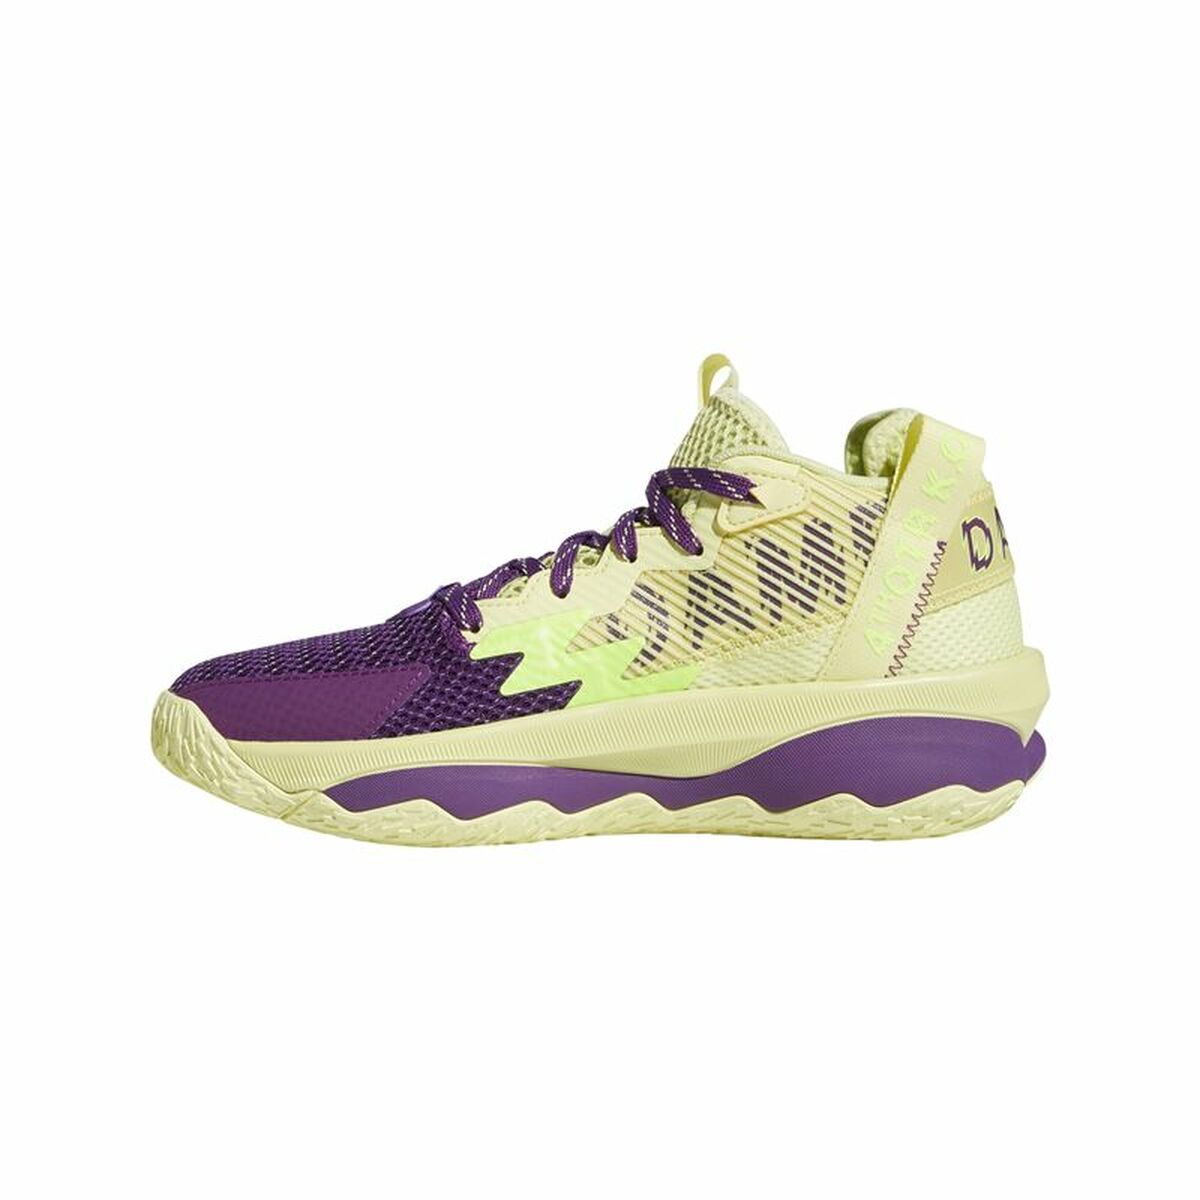 Basketball Shoes for Children Adidas Dame 3 Yellow